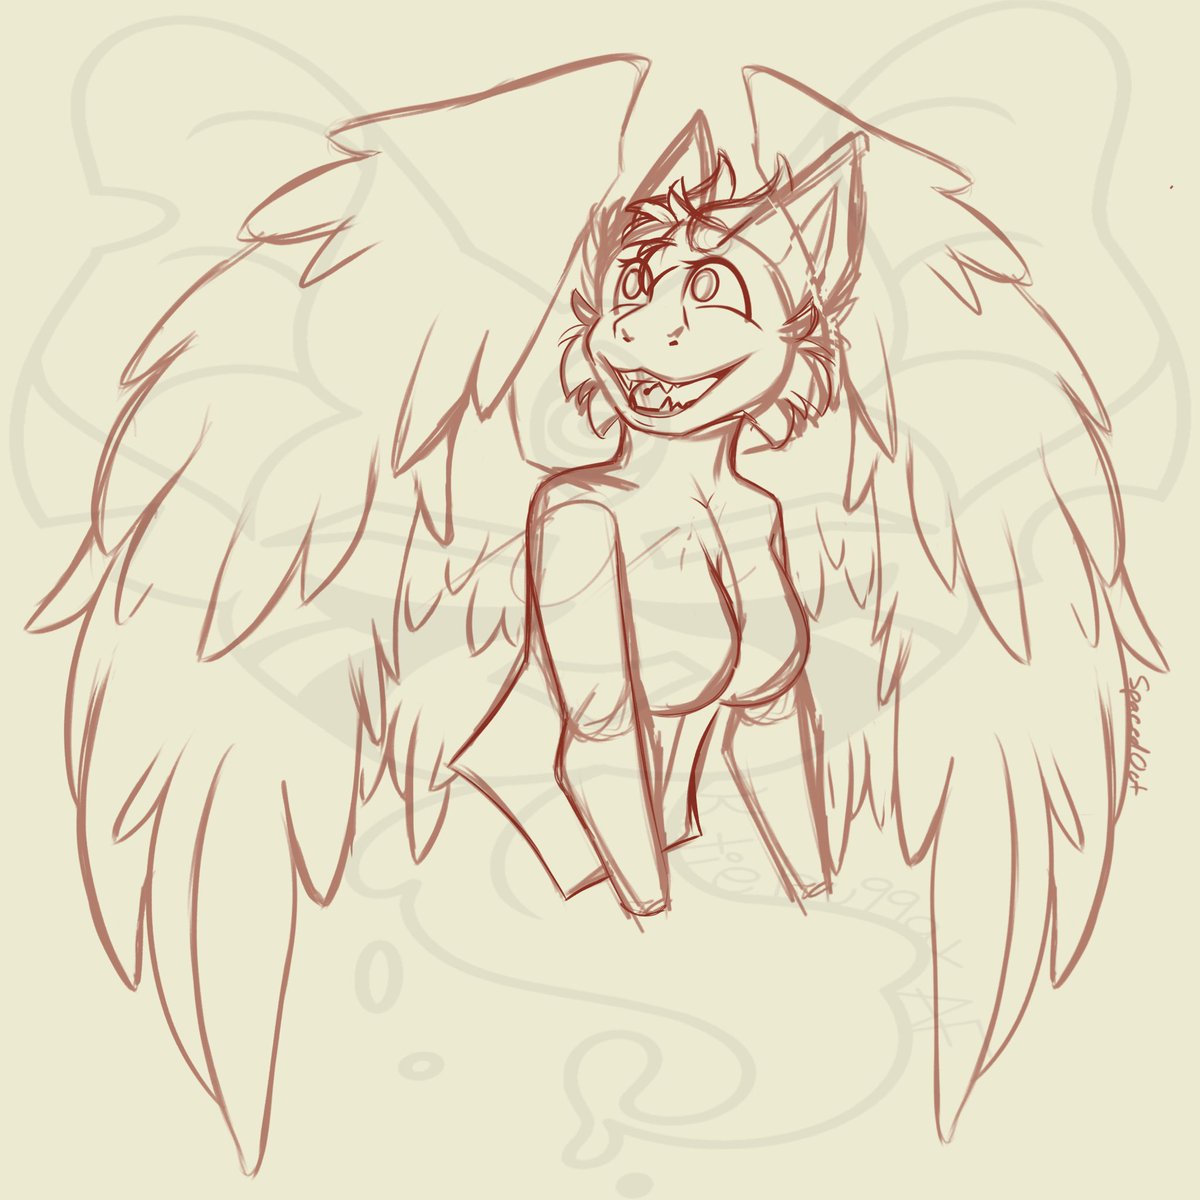 I haven’t drawn in a week or two so I’m forcing myself to do some revenge for artfight so here’s a sketch wip Forcing myself to draw wings